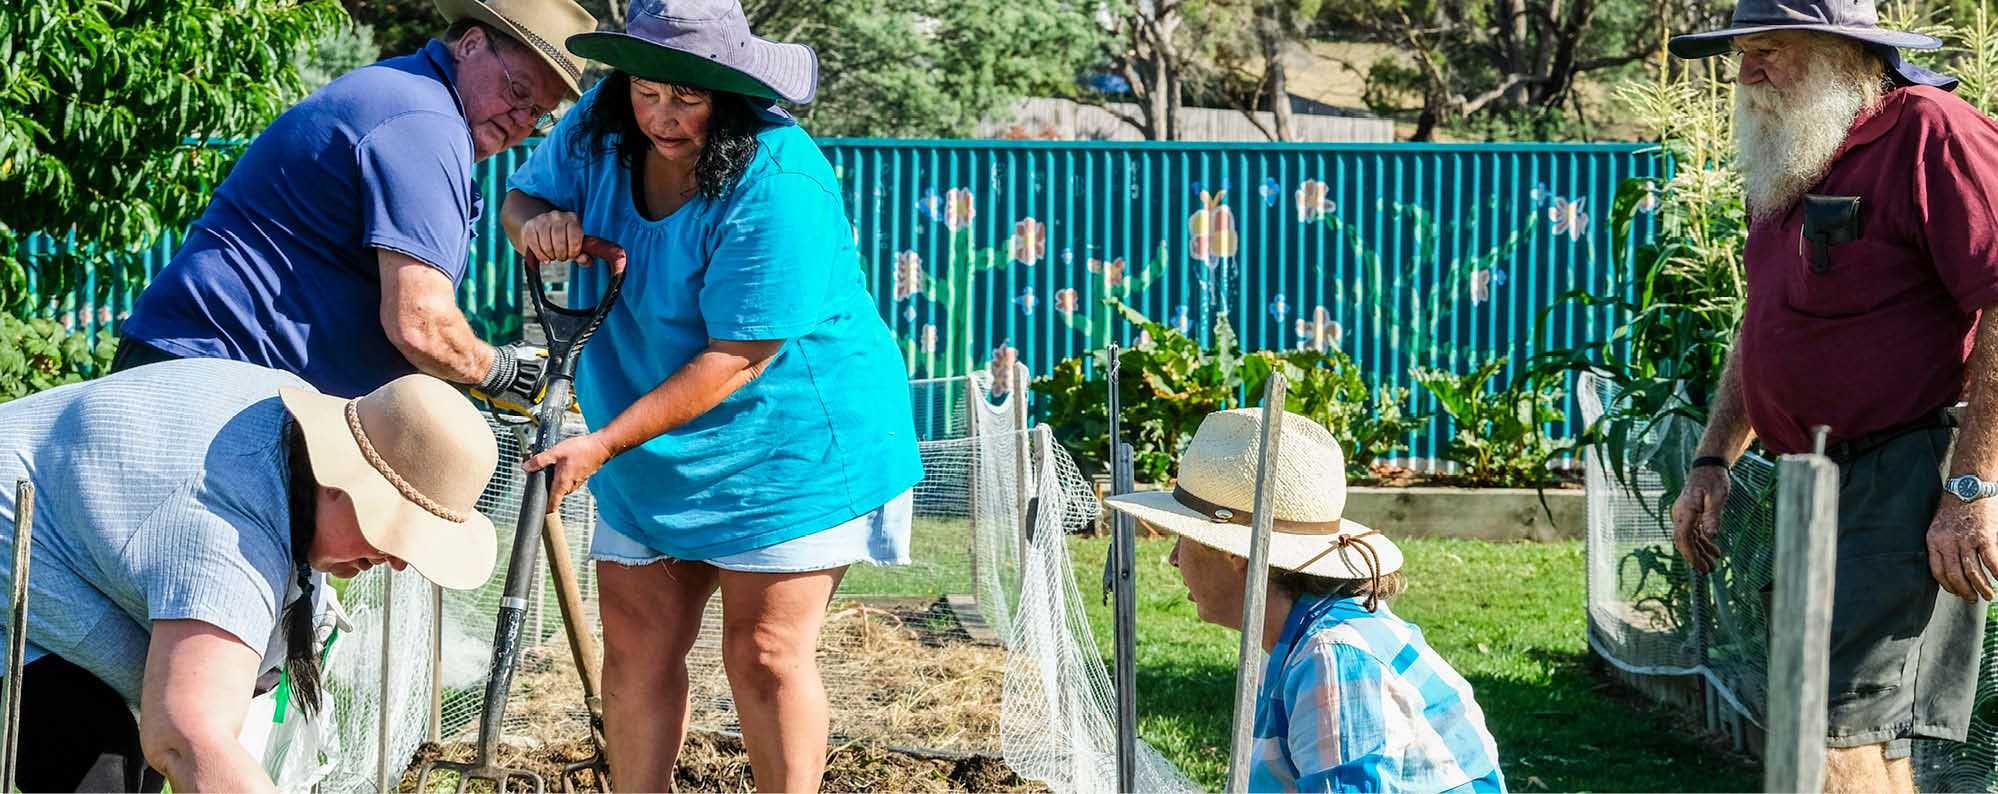 Community members working on a garden in the Northern Suburbs of Launceston